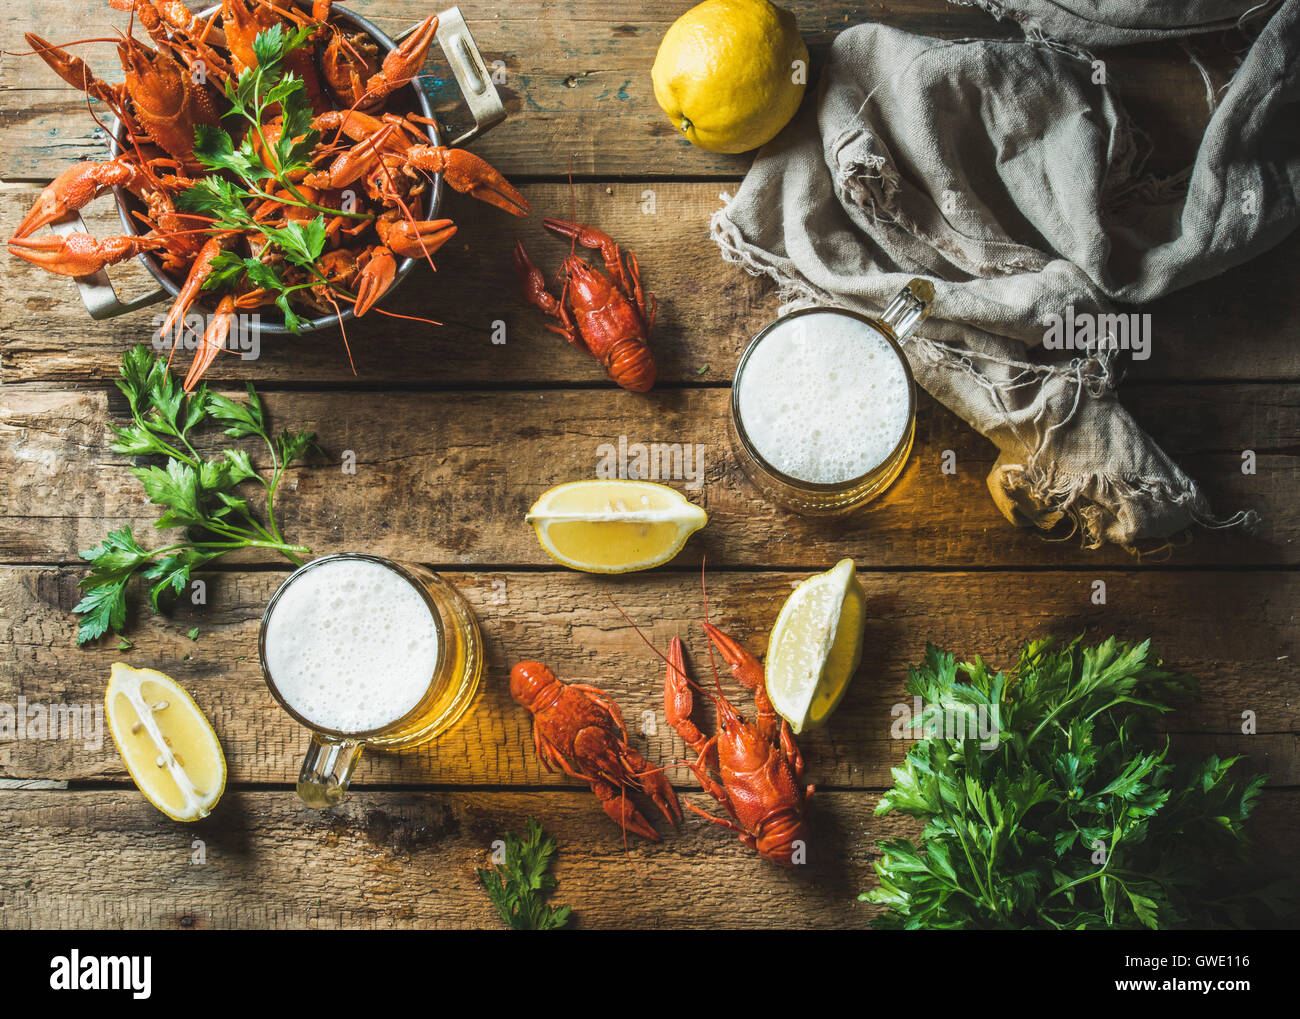 Two pints of wheat beer and boiled crayfish with lemon and parsley over old wooden rustic background, top view, horizontal compo Stock Photo